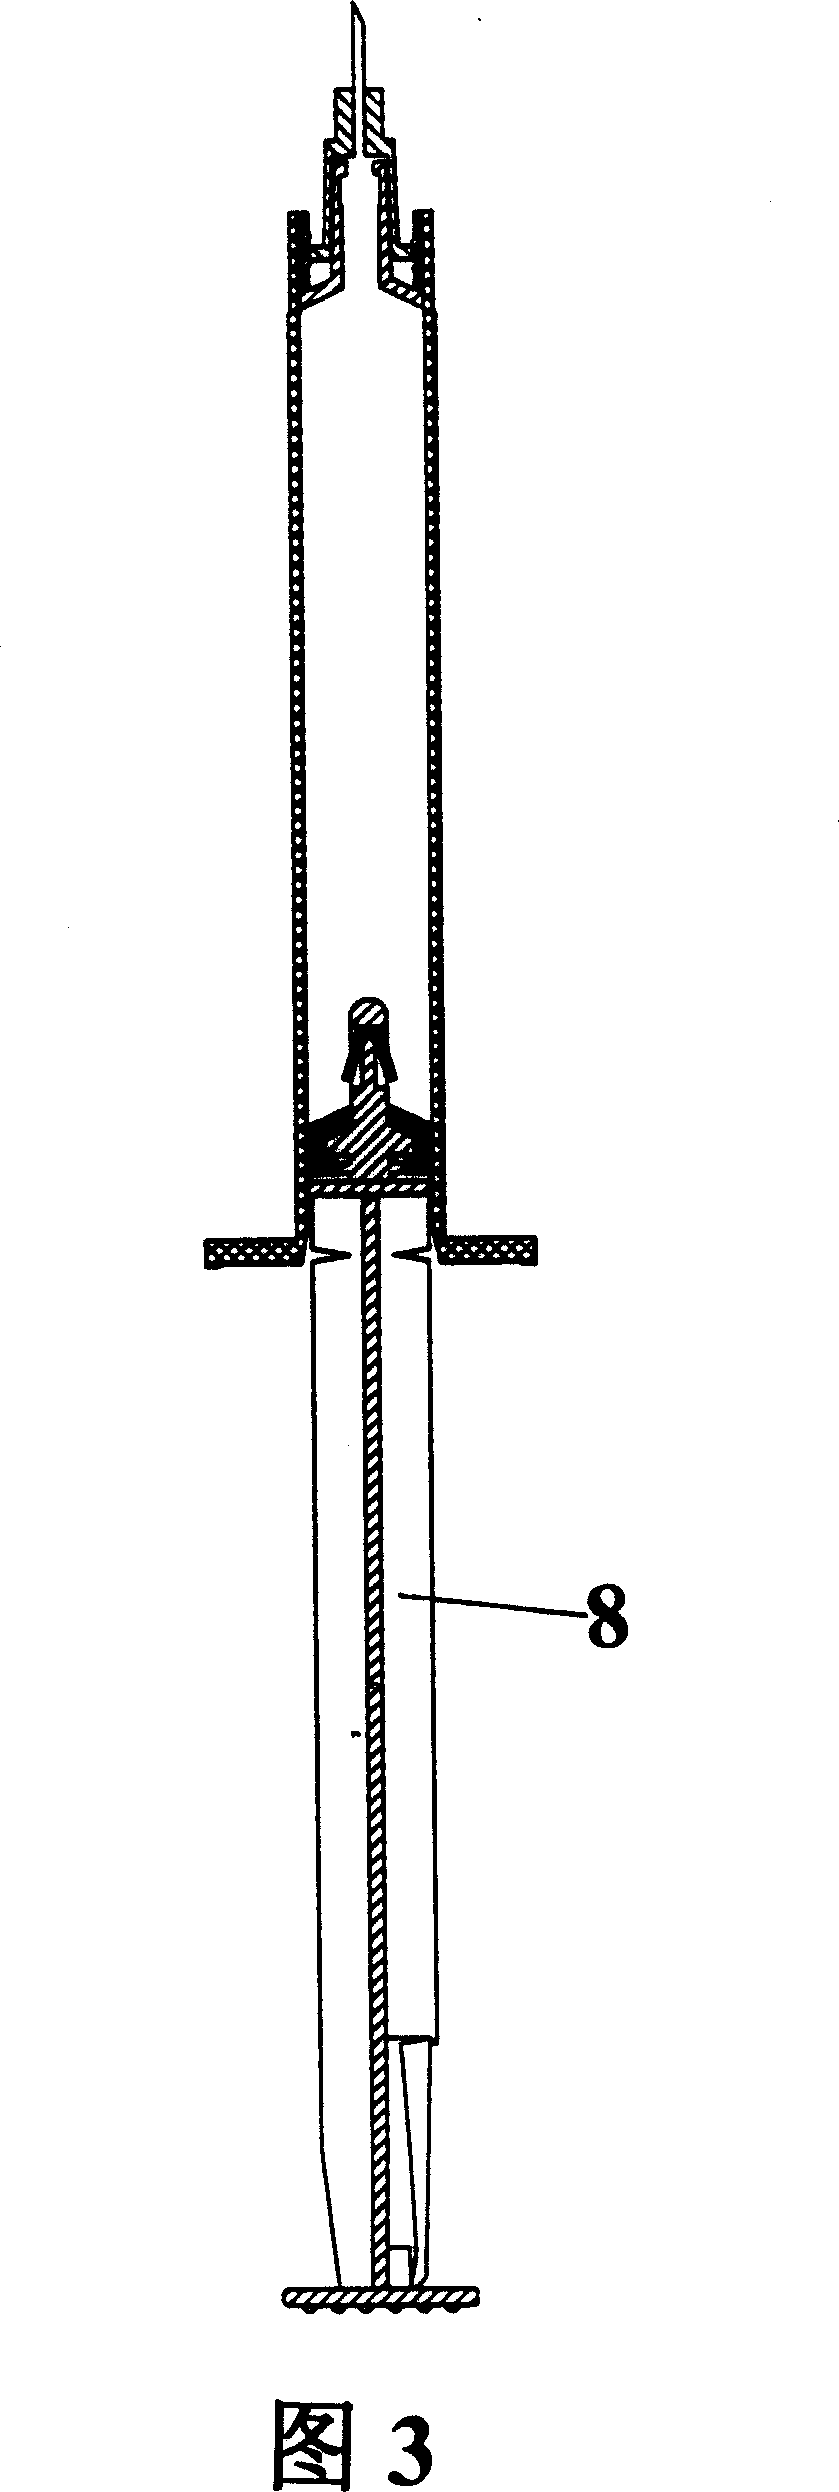 A safe self-destruction syringes with exchangeable needle